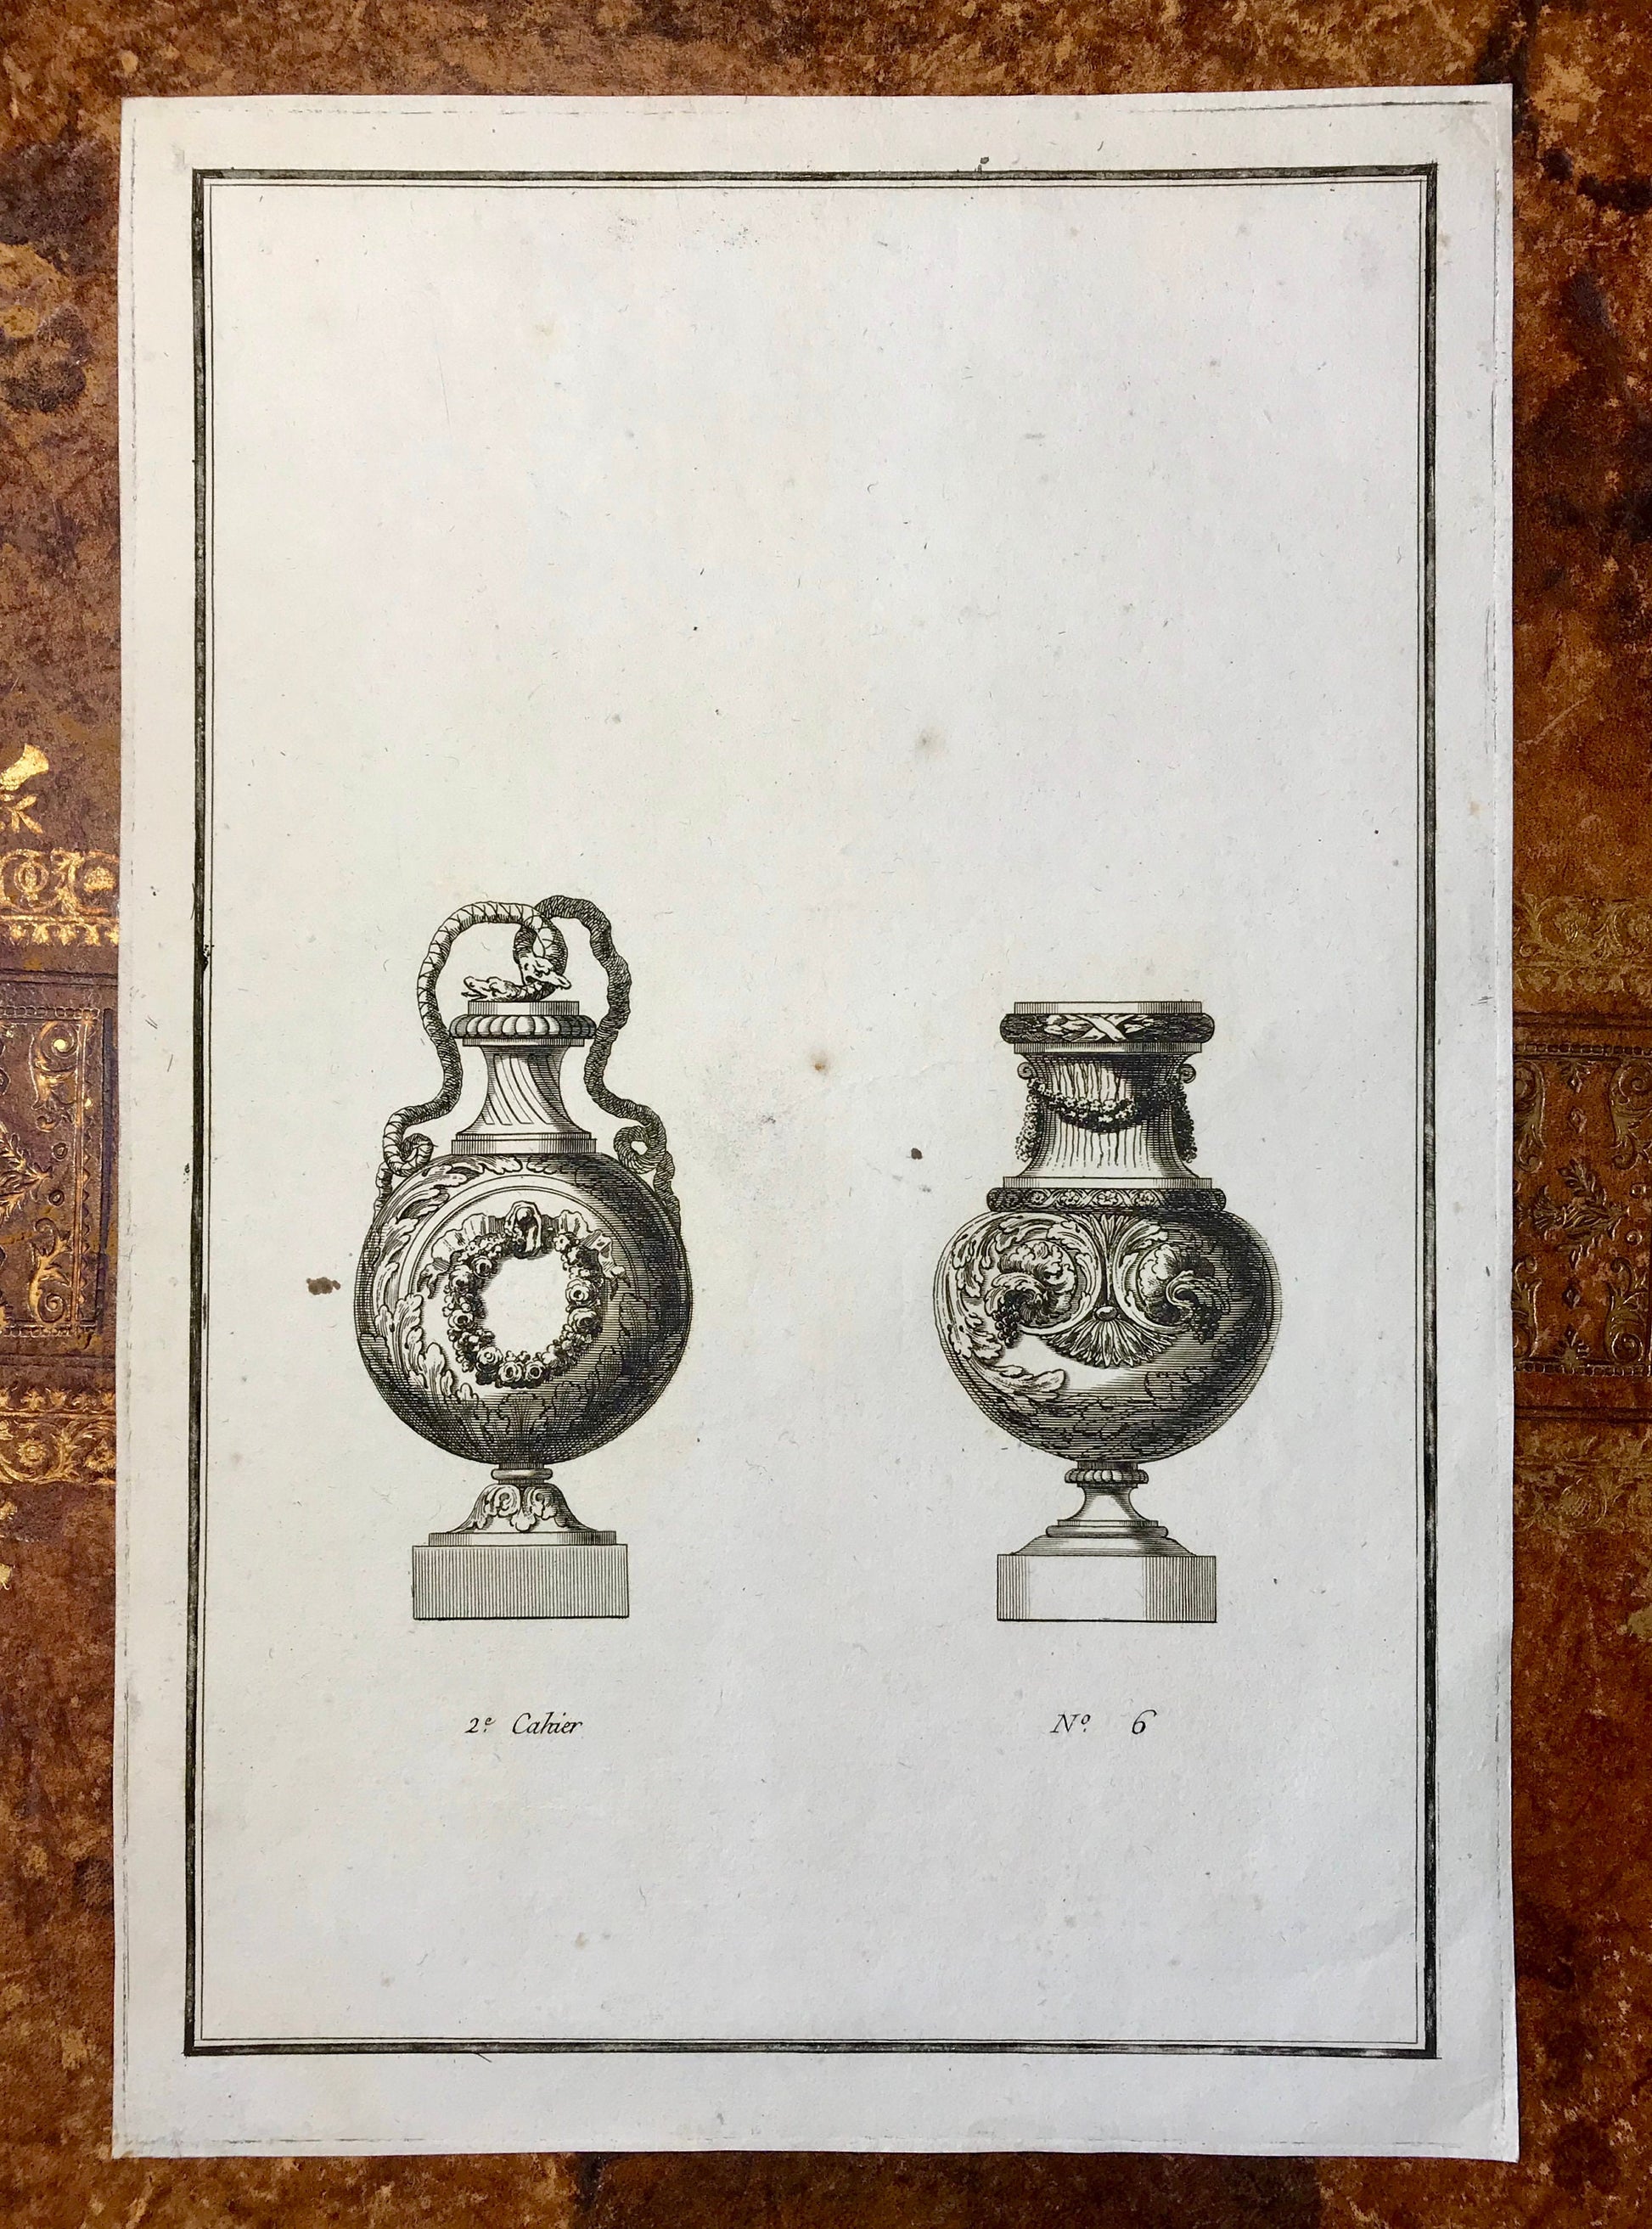 A Set of 6 Original Antique Engravings Showing Designs for Vases. Numbered 1 to 6. By Pierre de Fontanieu. Dated 1770. 36 x 24.2 cms.